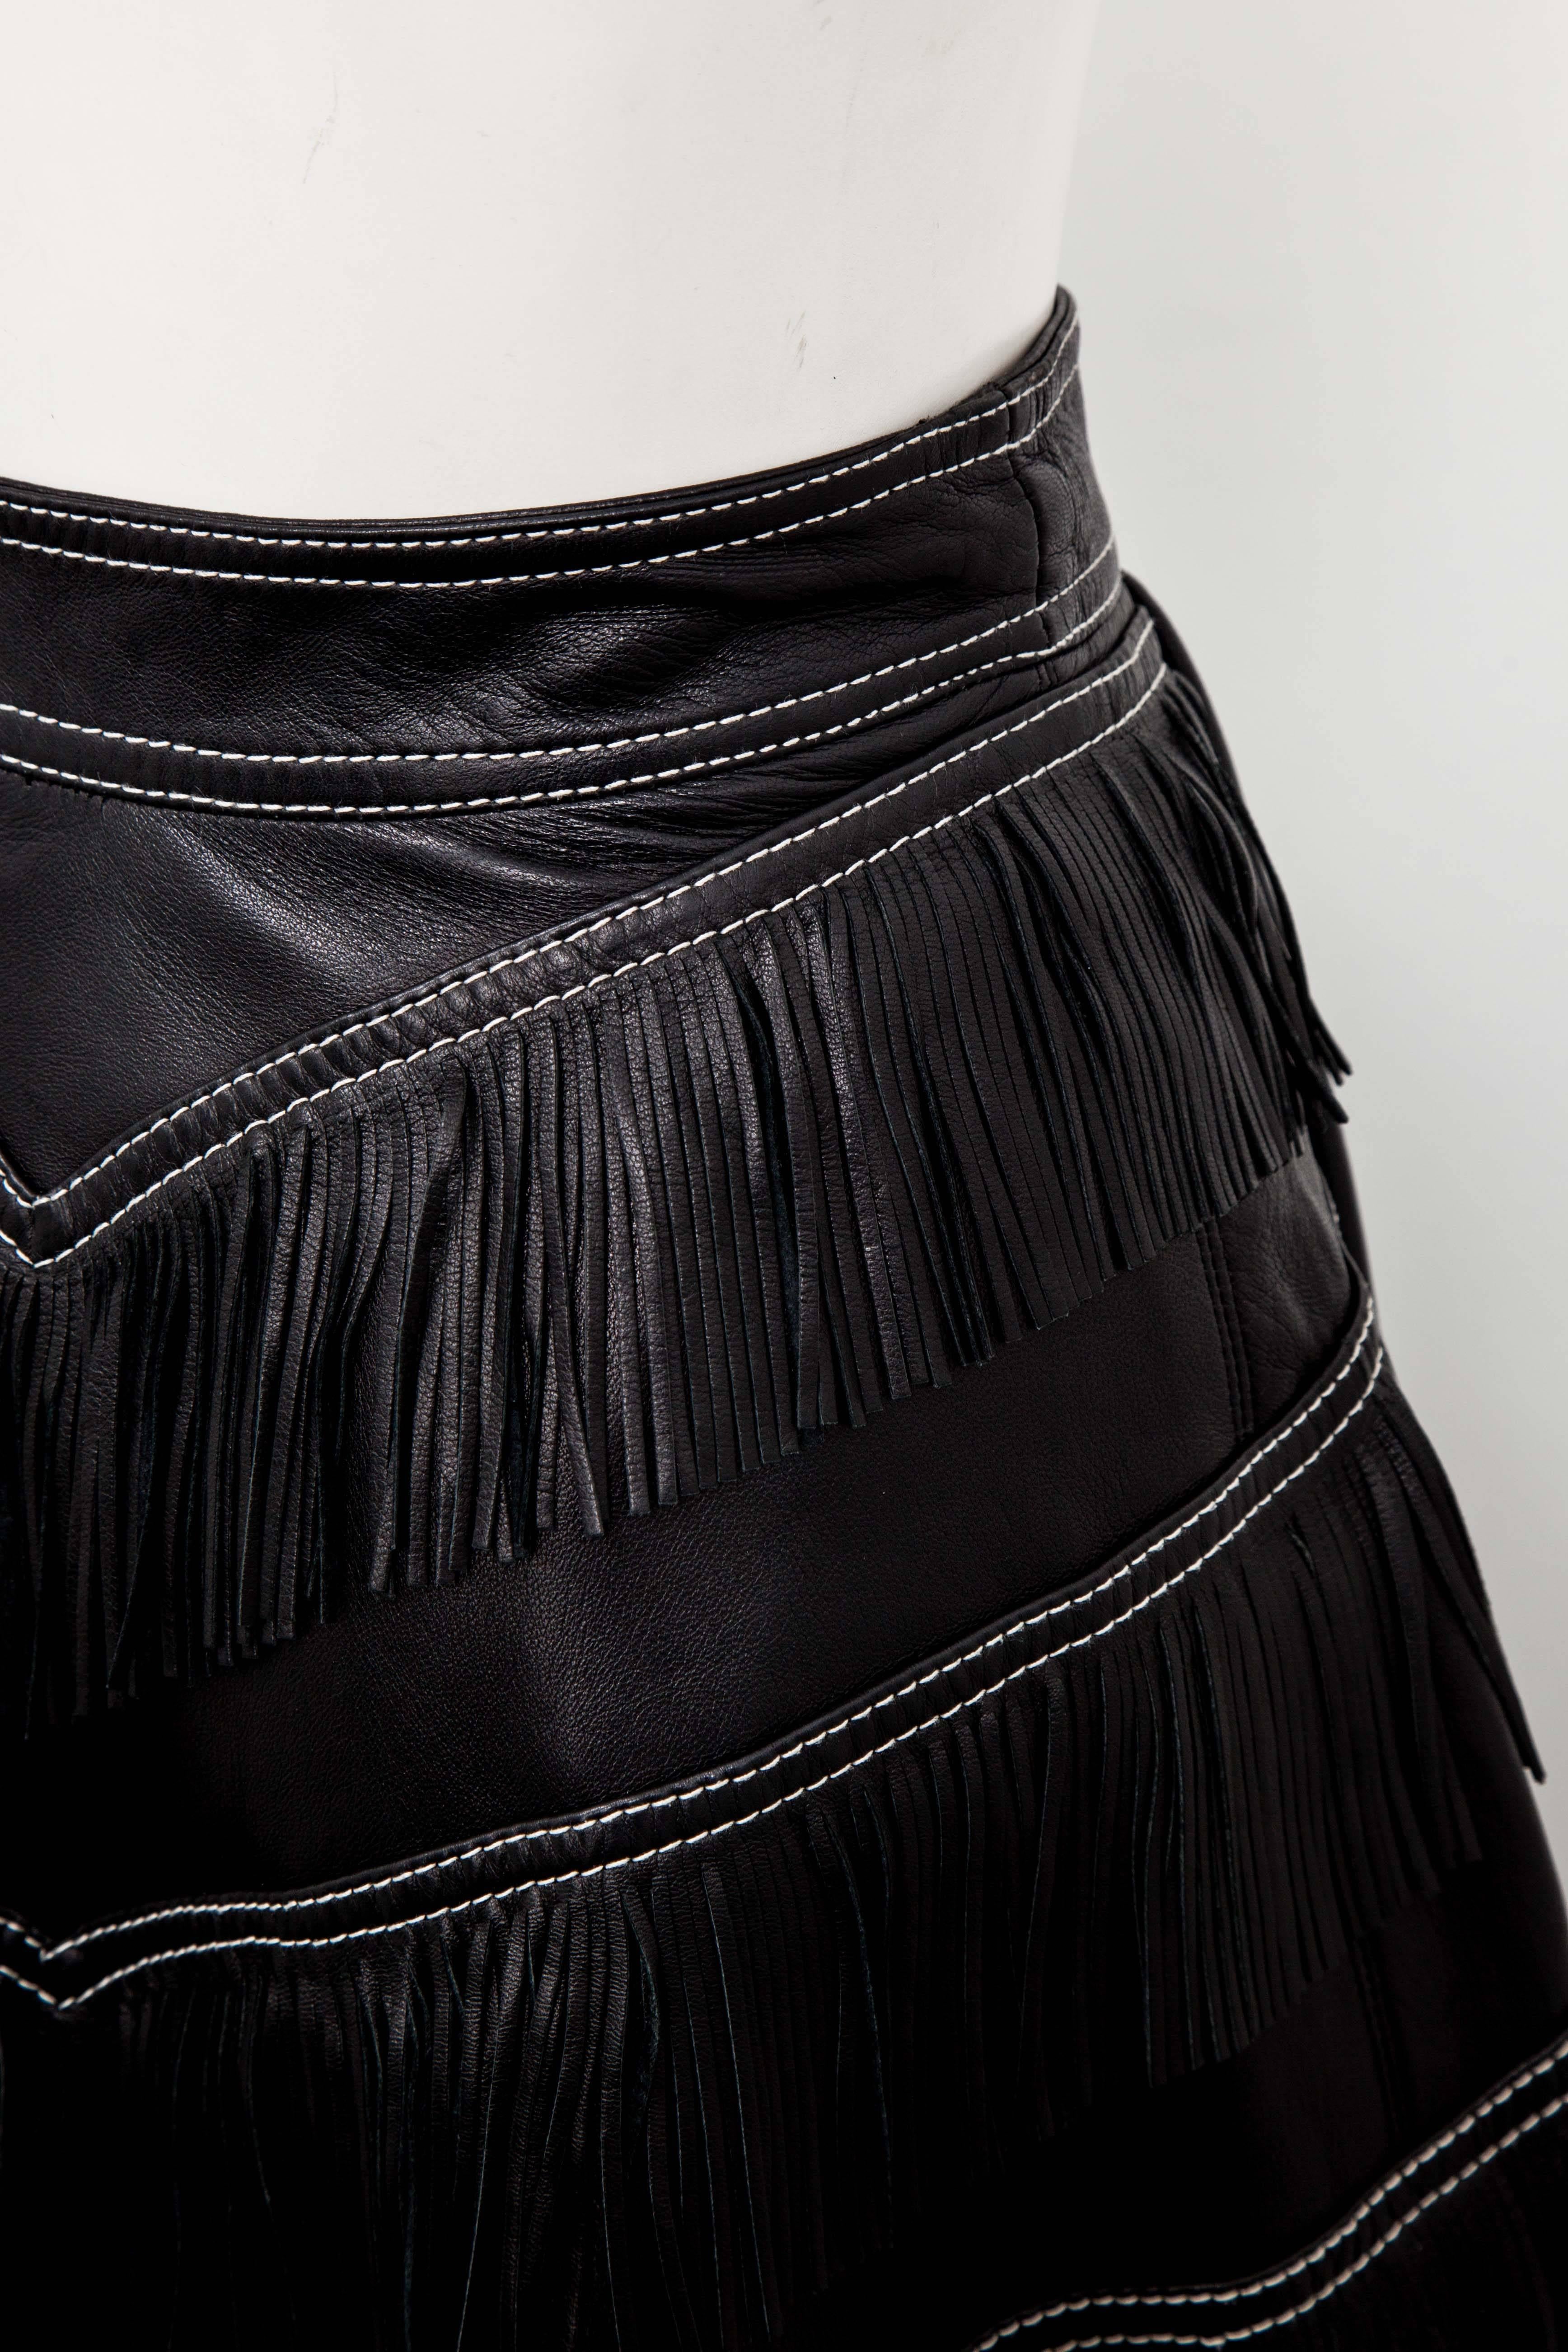 Gianni Versace Iconic 1992 Runway Black Leather Fringe Skirt In Excellent Condition For Sale In Chicago, IL